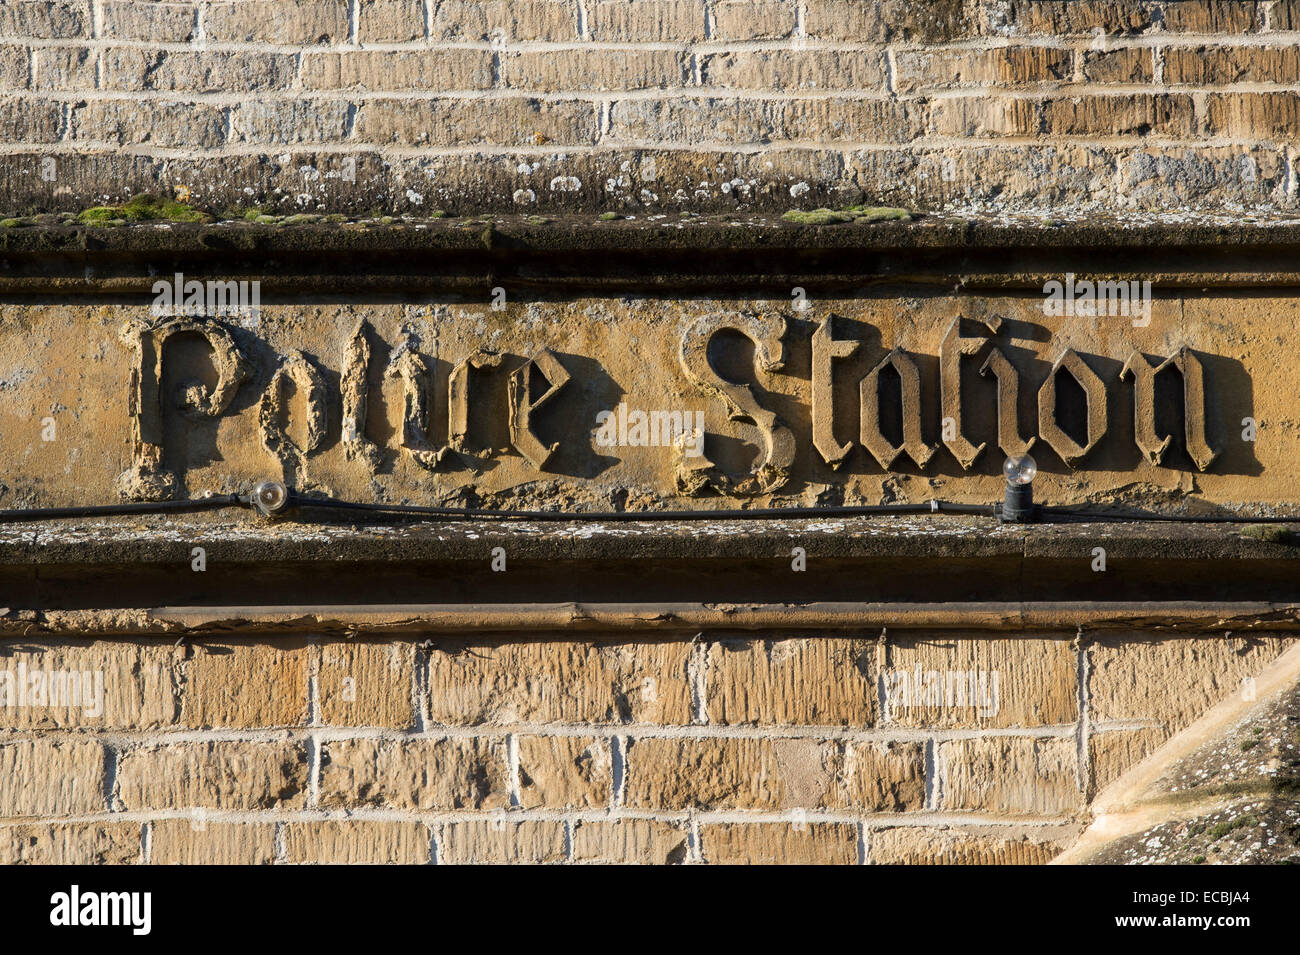 Crumbling Police station stone carving in Stow on the Wold, Cotswolds, Gloucestershire, England Stock Photo